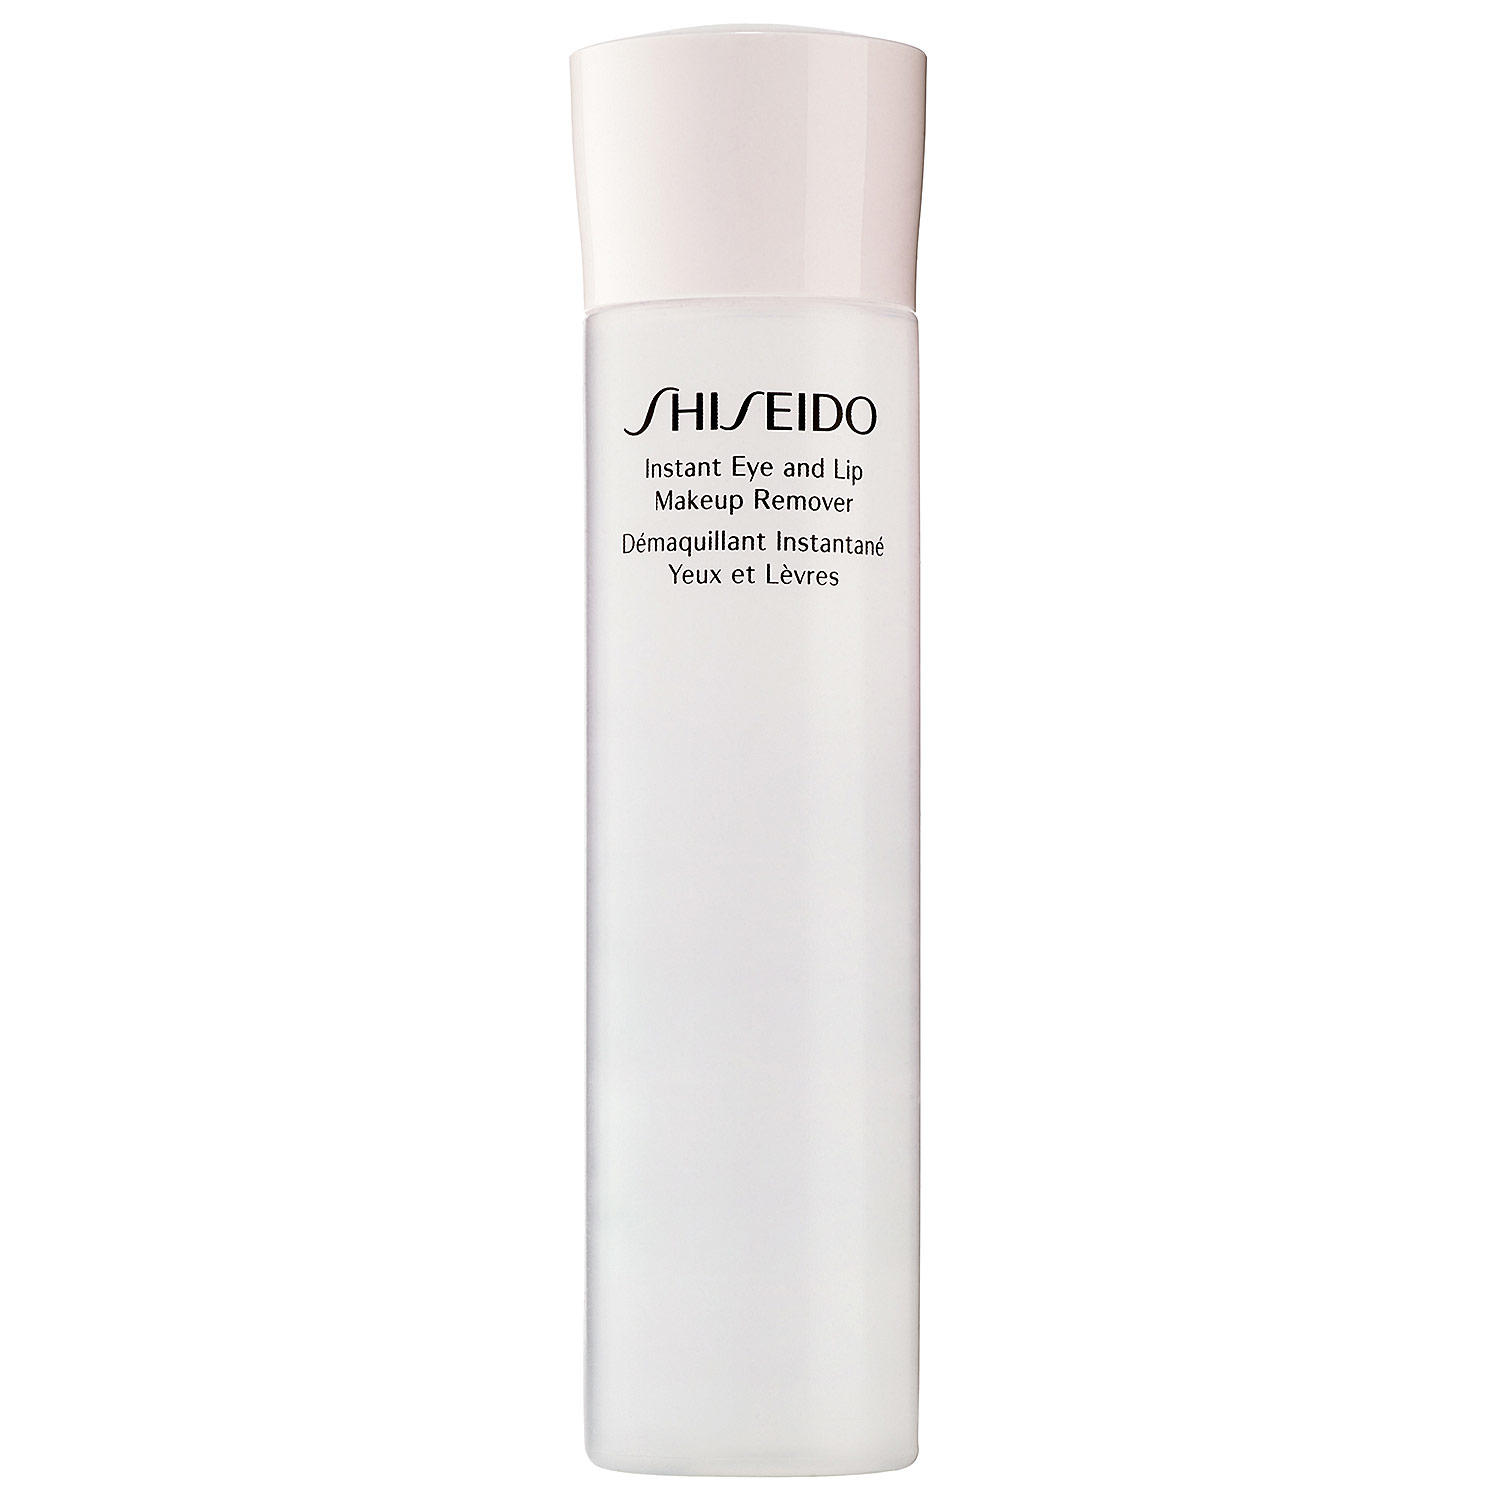 SHISEIDO The Skincare Instant Eye and Lip Makeup Remover